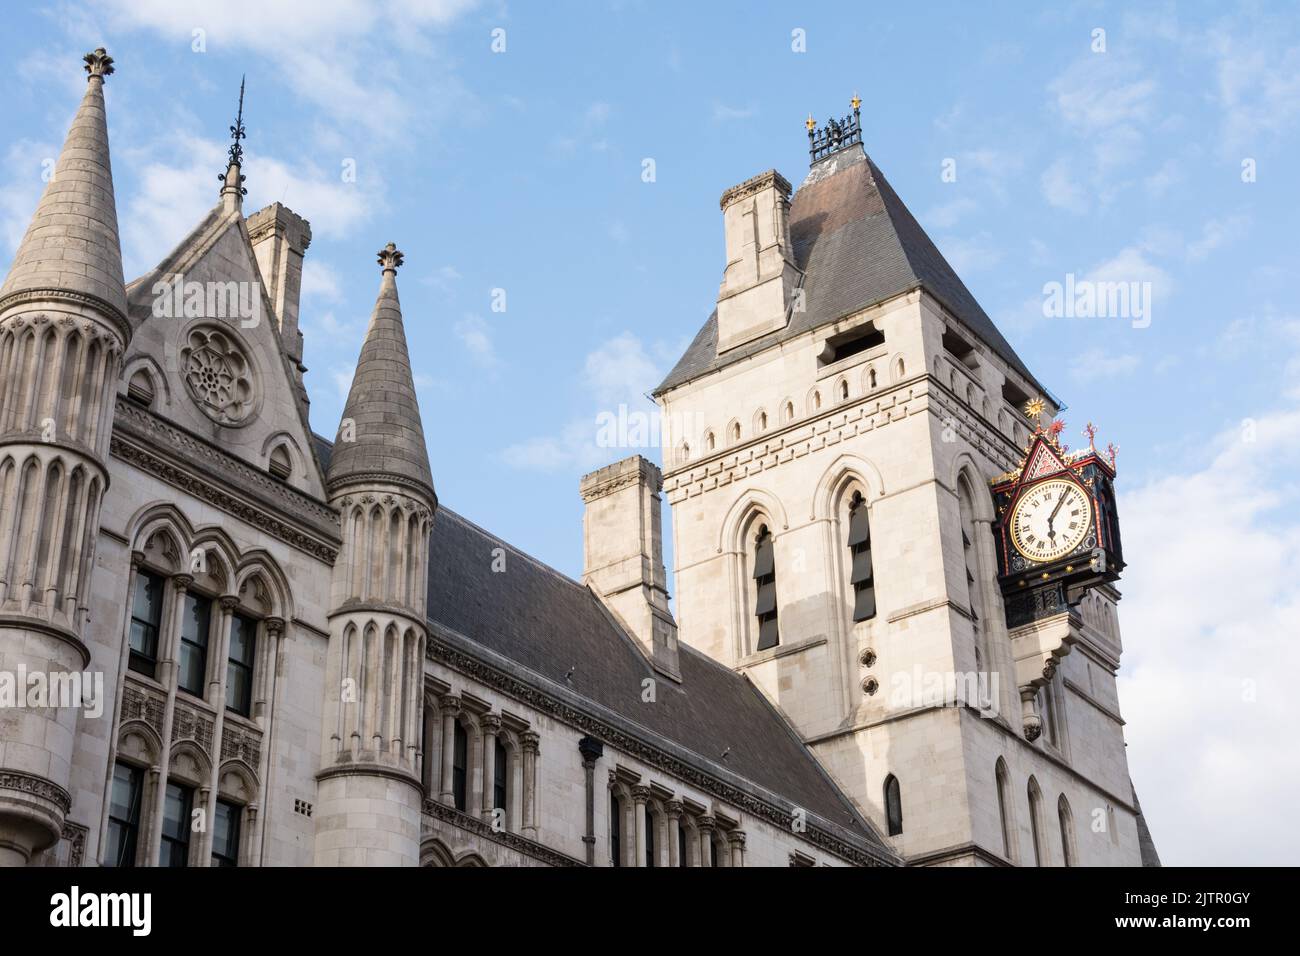 The clock face and tower on the Royal Courts of Justice, Fleet Street, London, England, UK Stock Photo